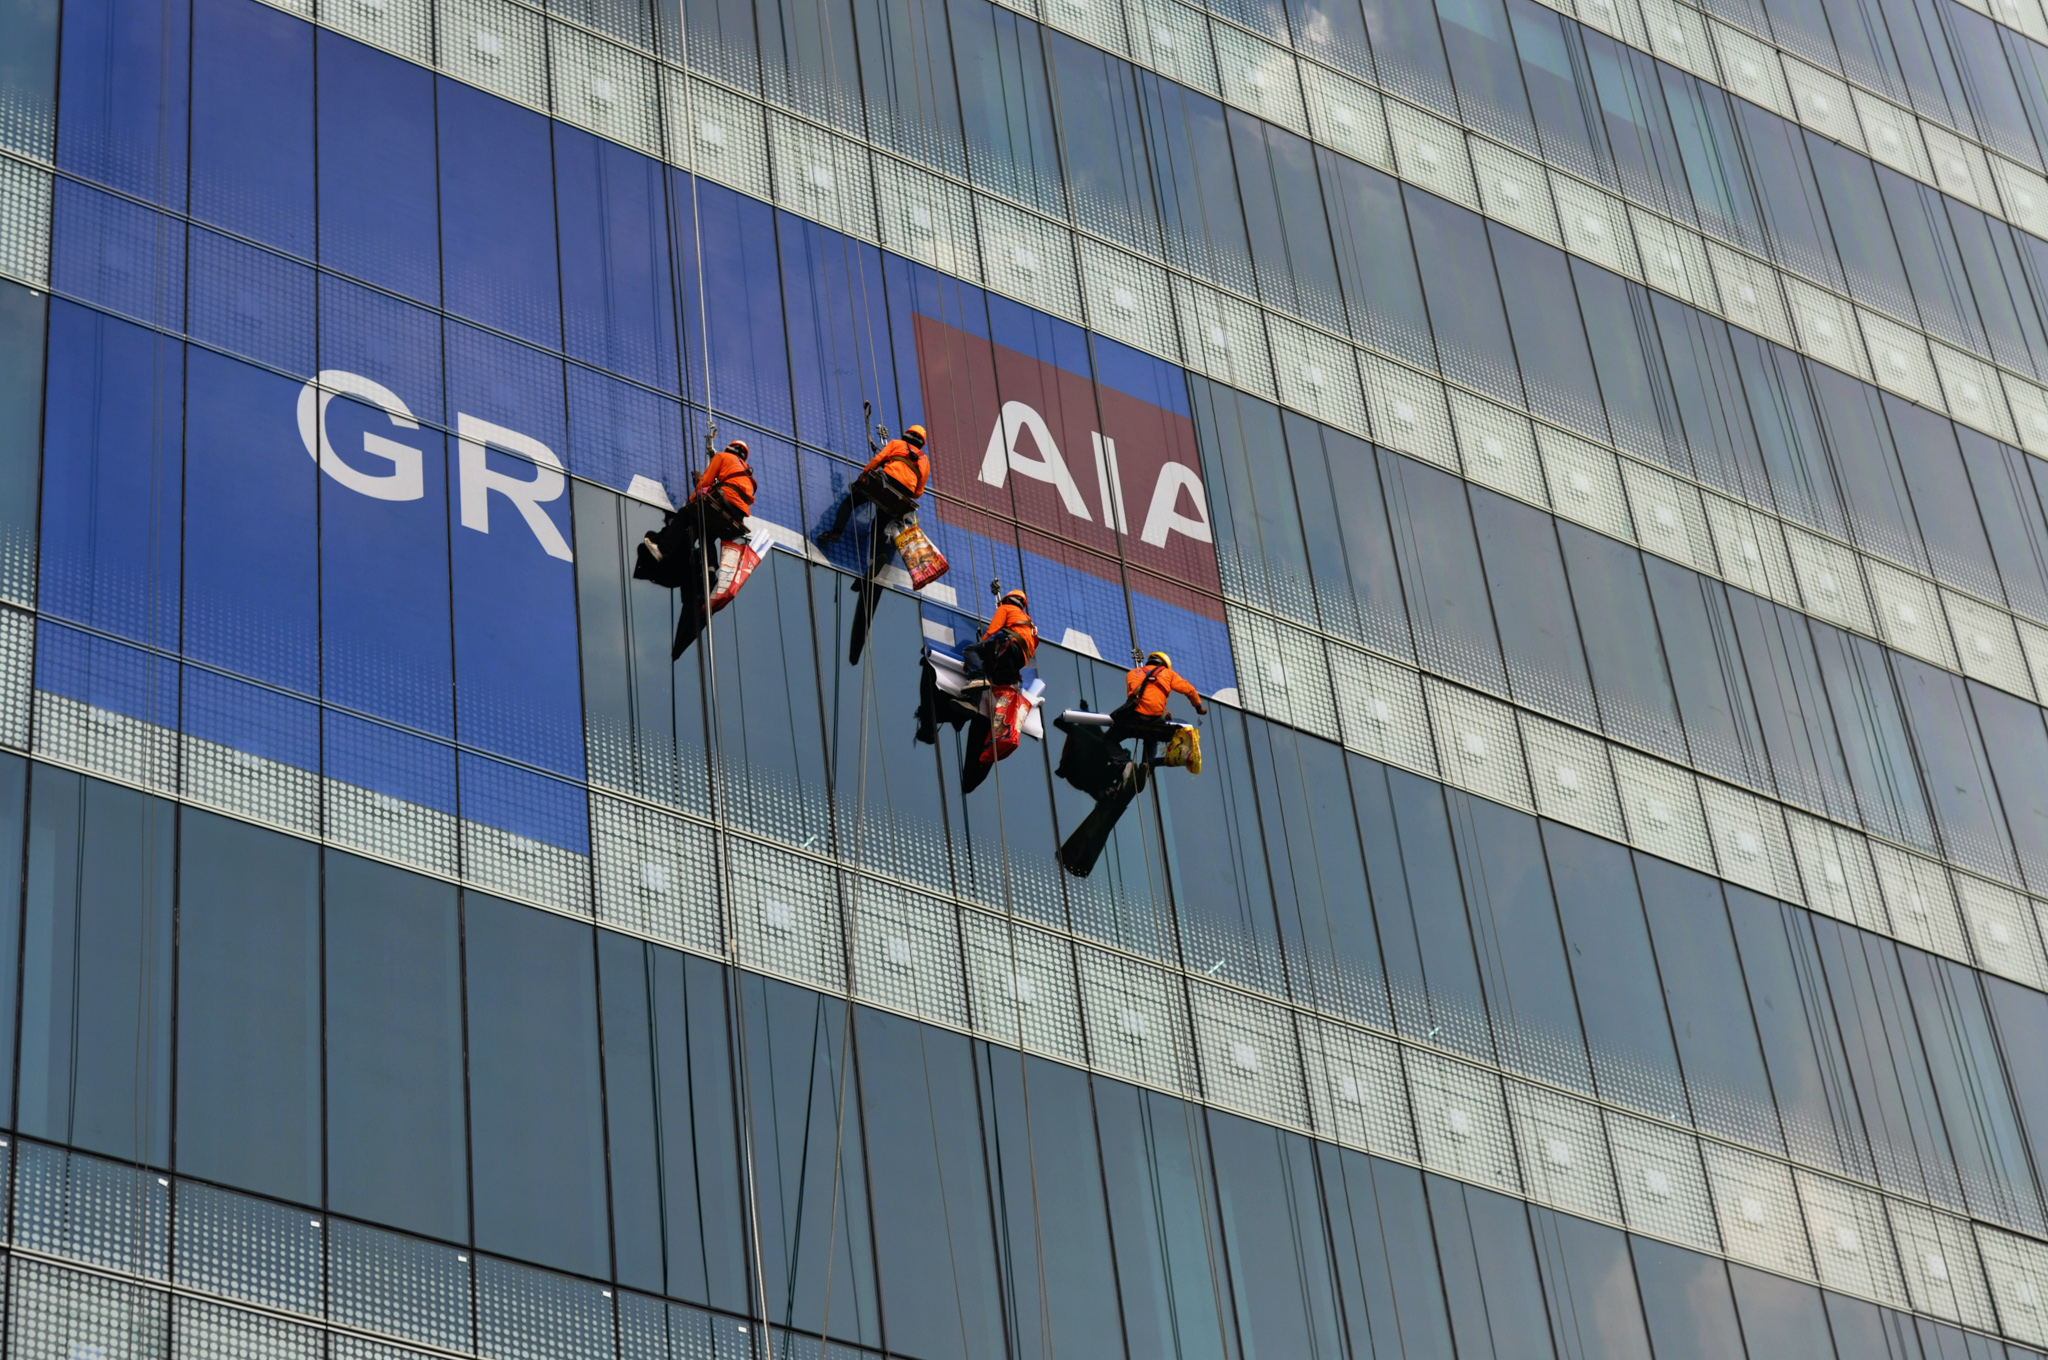 4 men handing on ropes cleaning the side of a building.